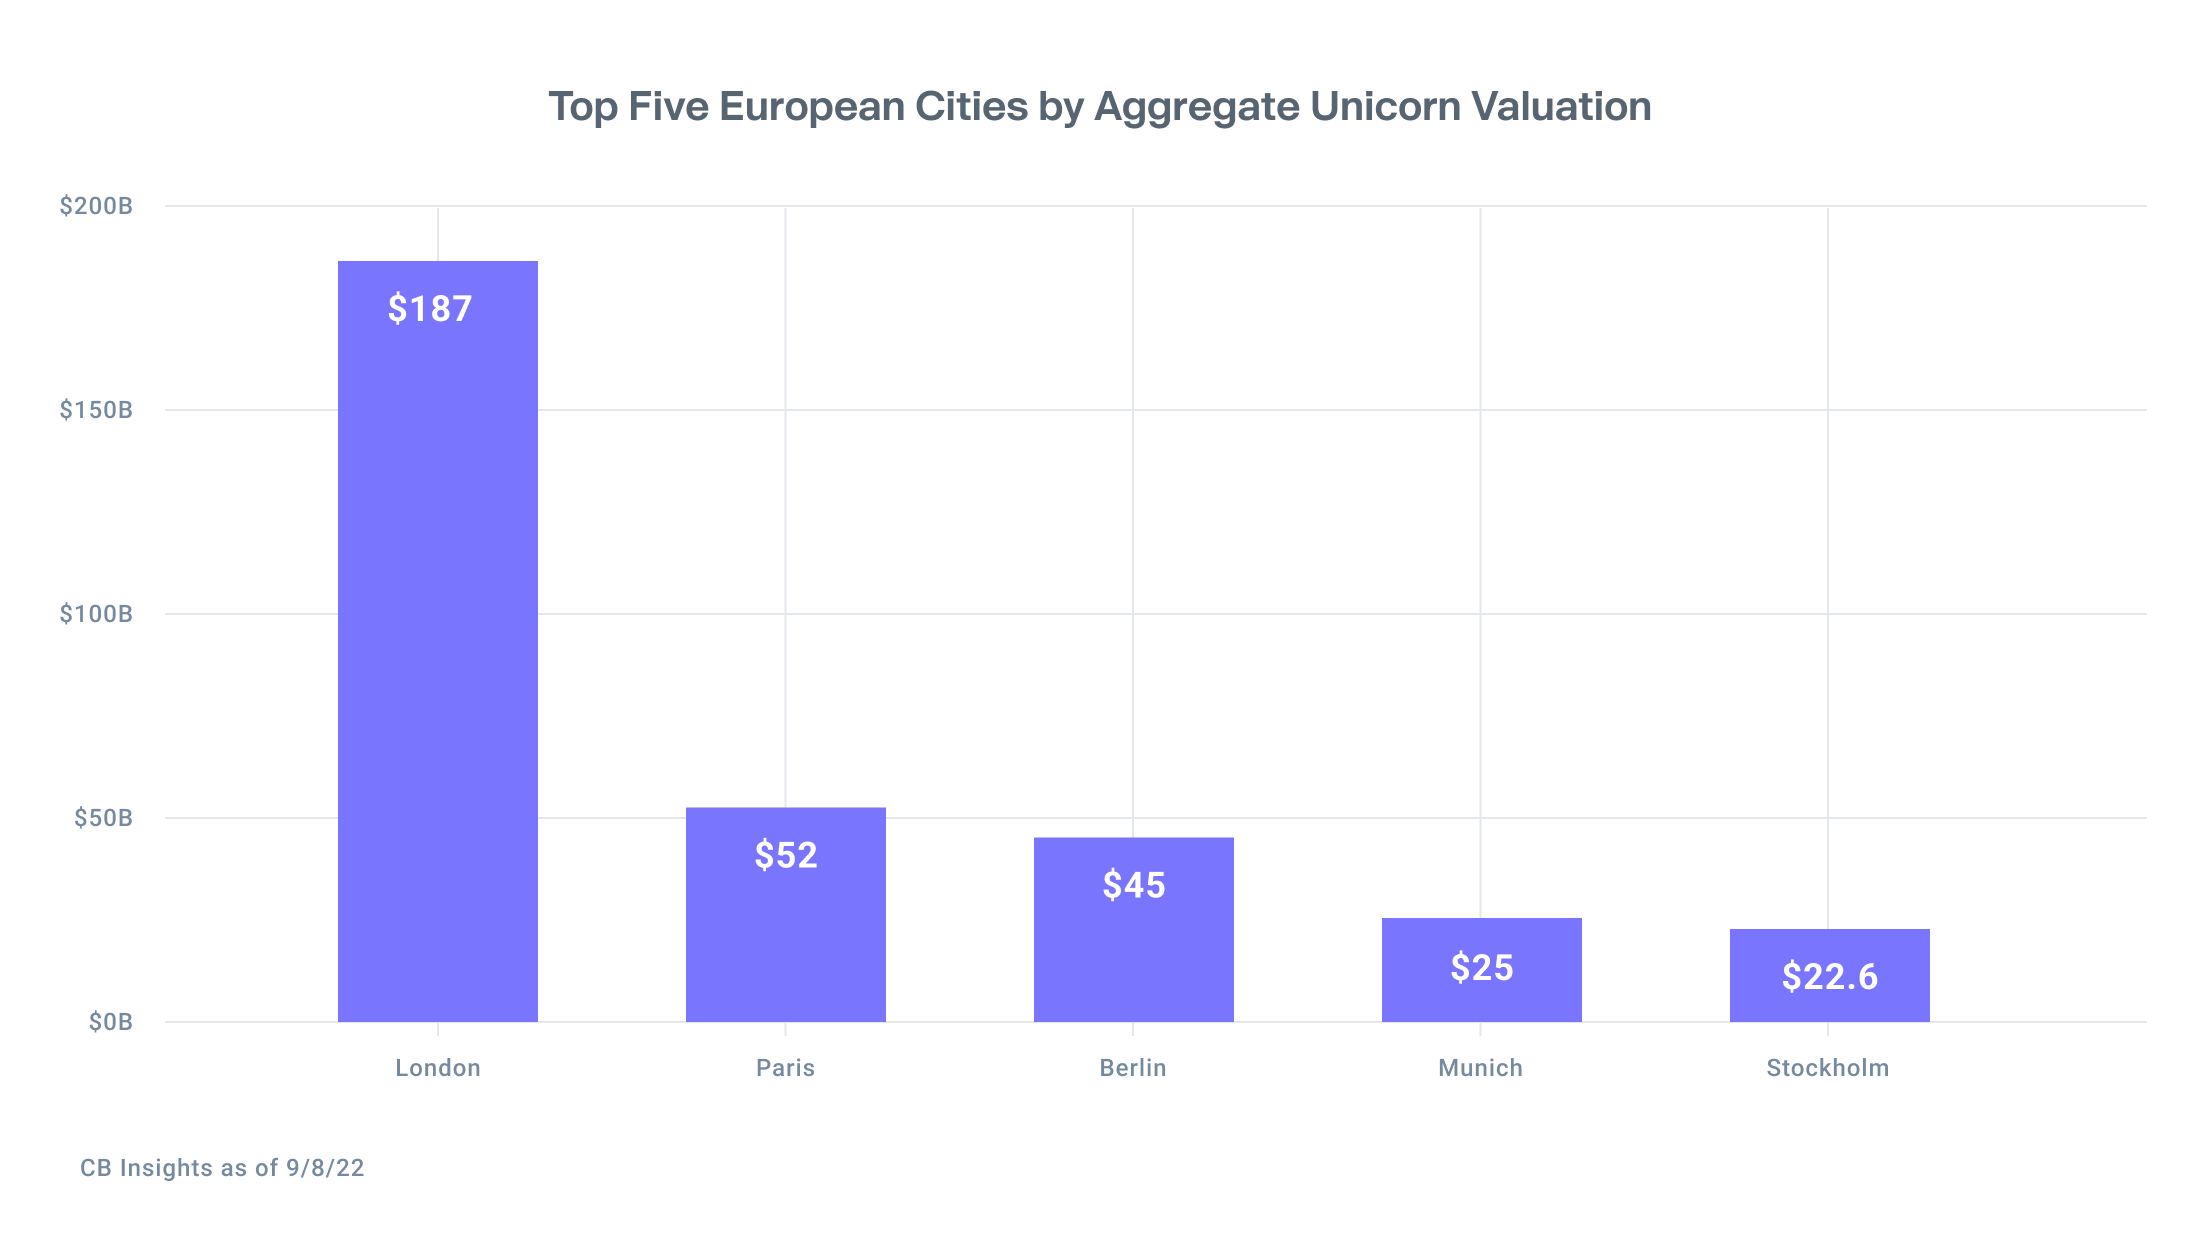 Bar chart shows that by aggregate London's unicorn valuation is up to $187B